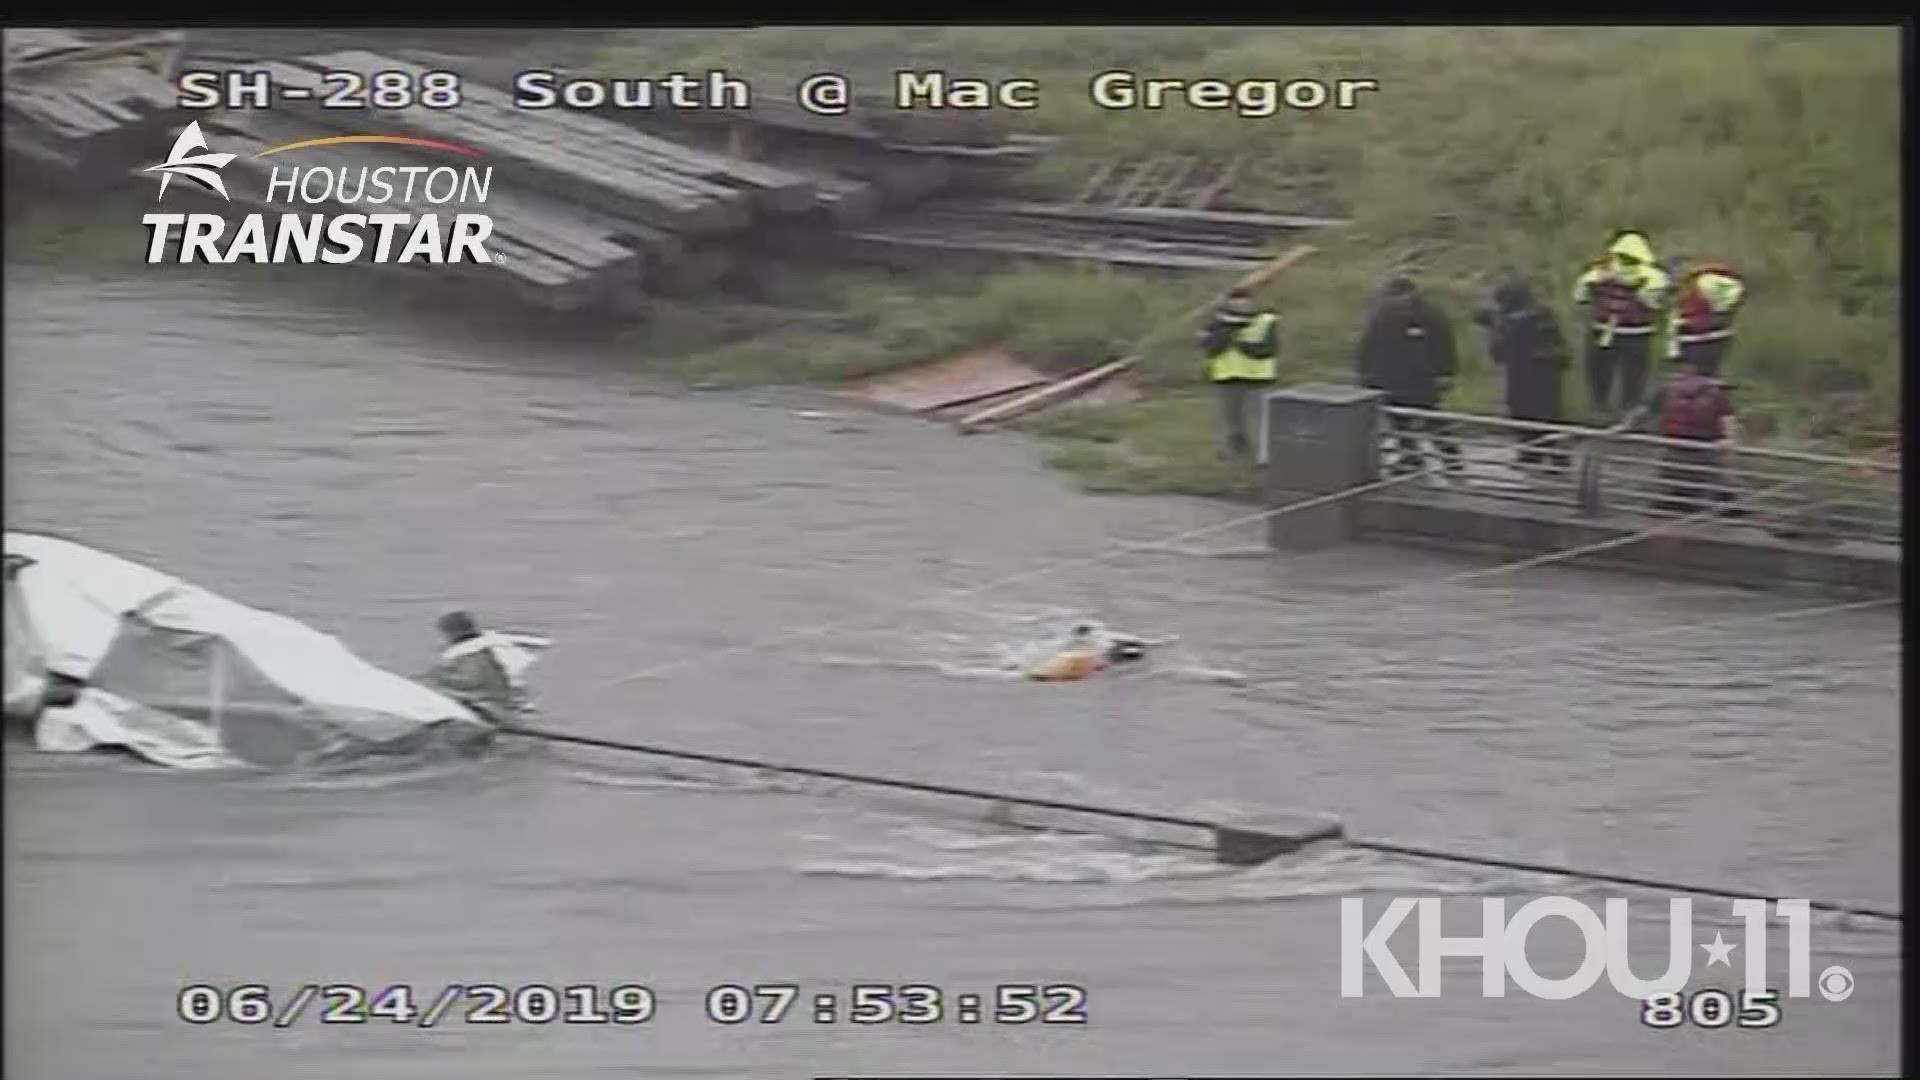 Houston firefighters rescued a man who was stuck in high water along Brays Bayou early Monday. 
Firefighters responded to the bayou along MacGregor east of Highway 288 around 7:25 a.m.